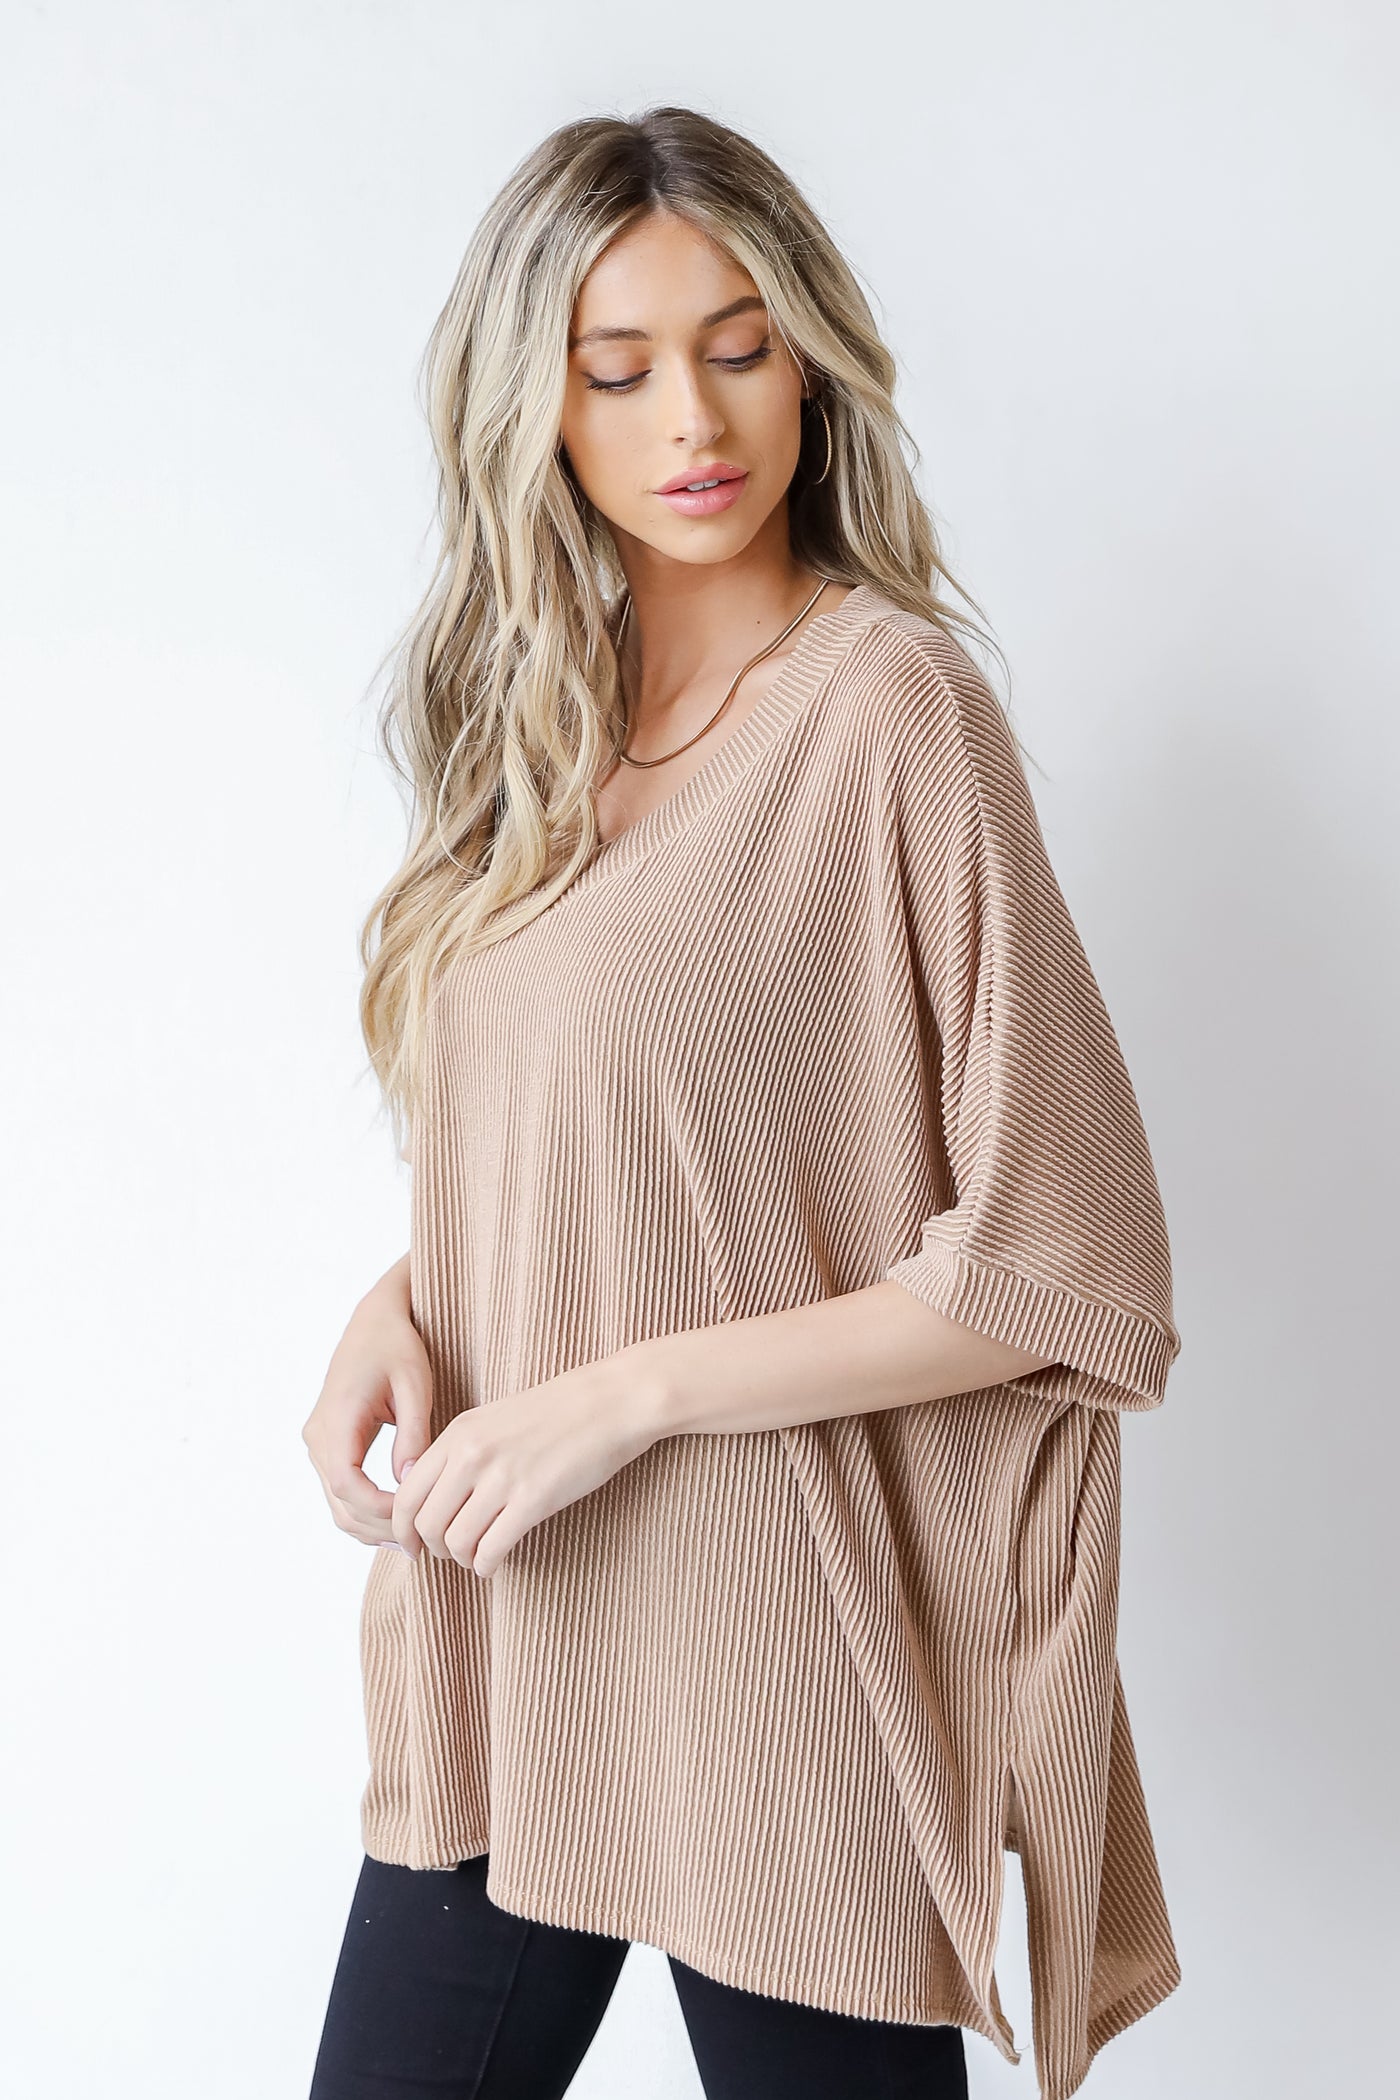 Oversized Corded Top in camel side view